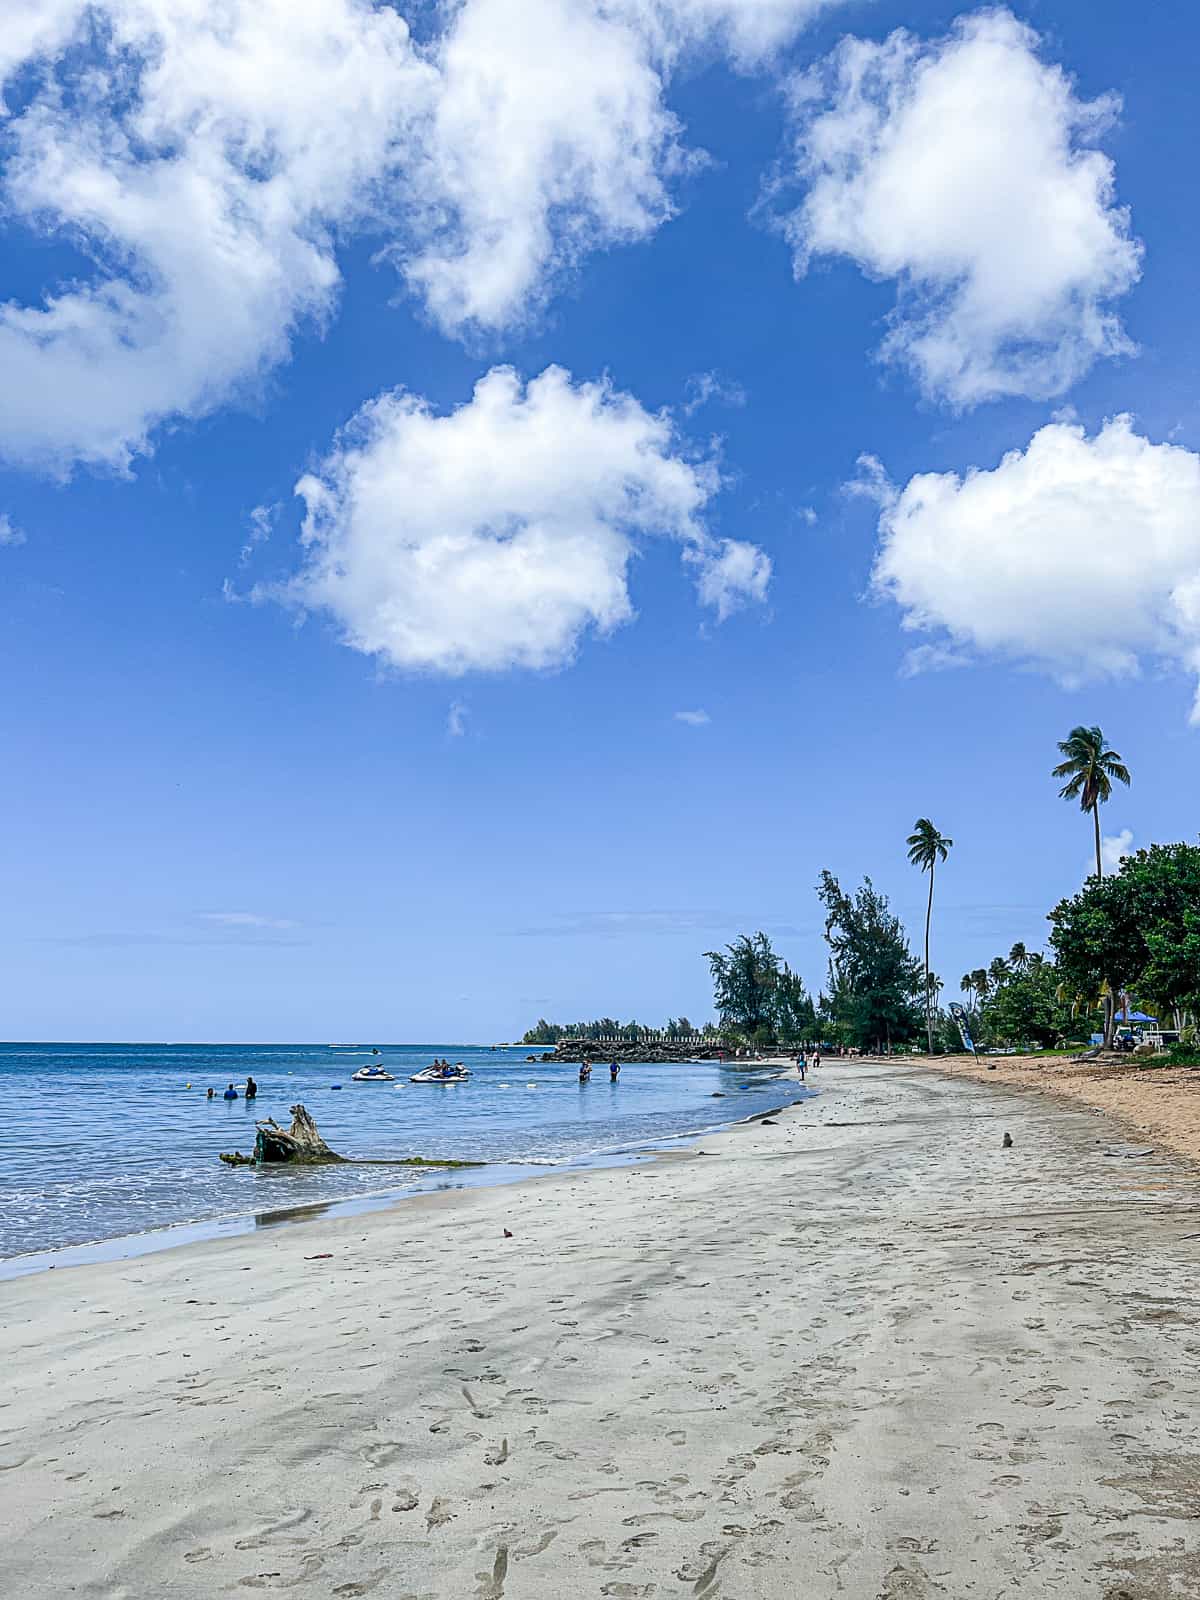 Playa Fortuna Beach Views With Palm Trees at Luquillo Puerto Rico